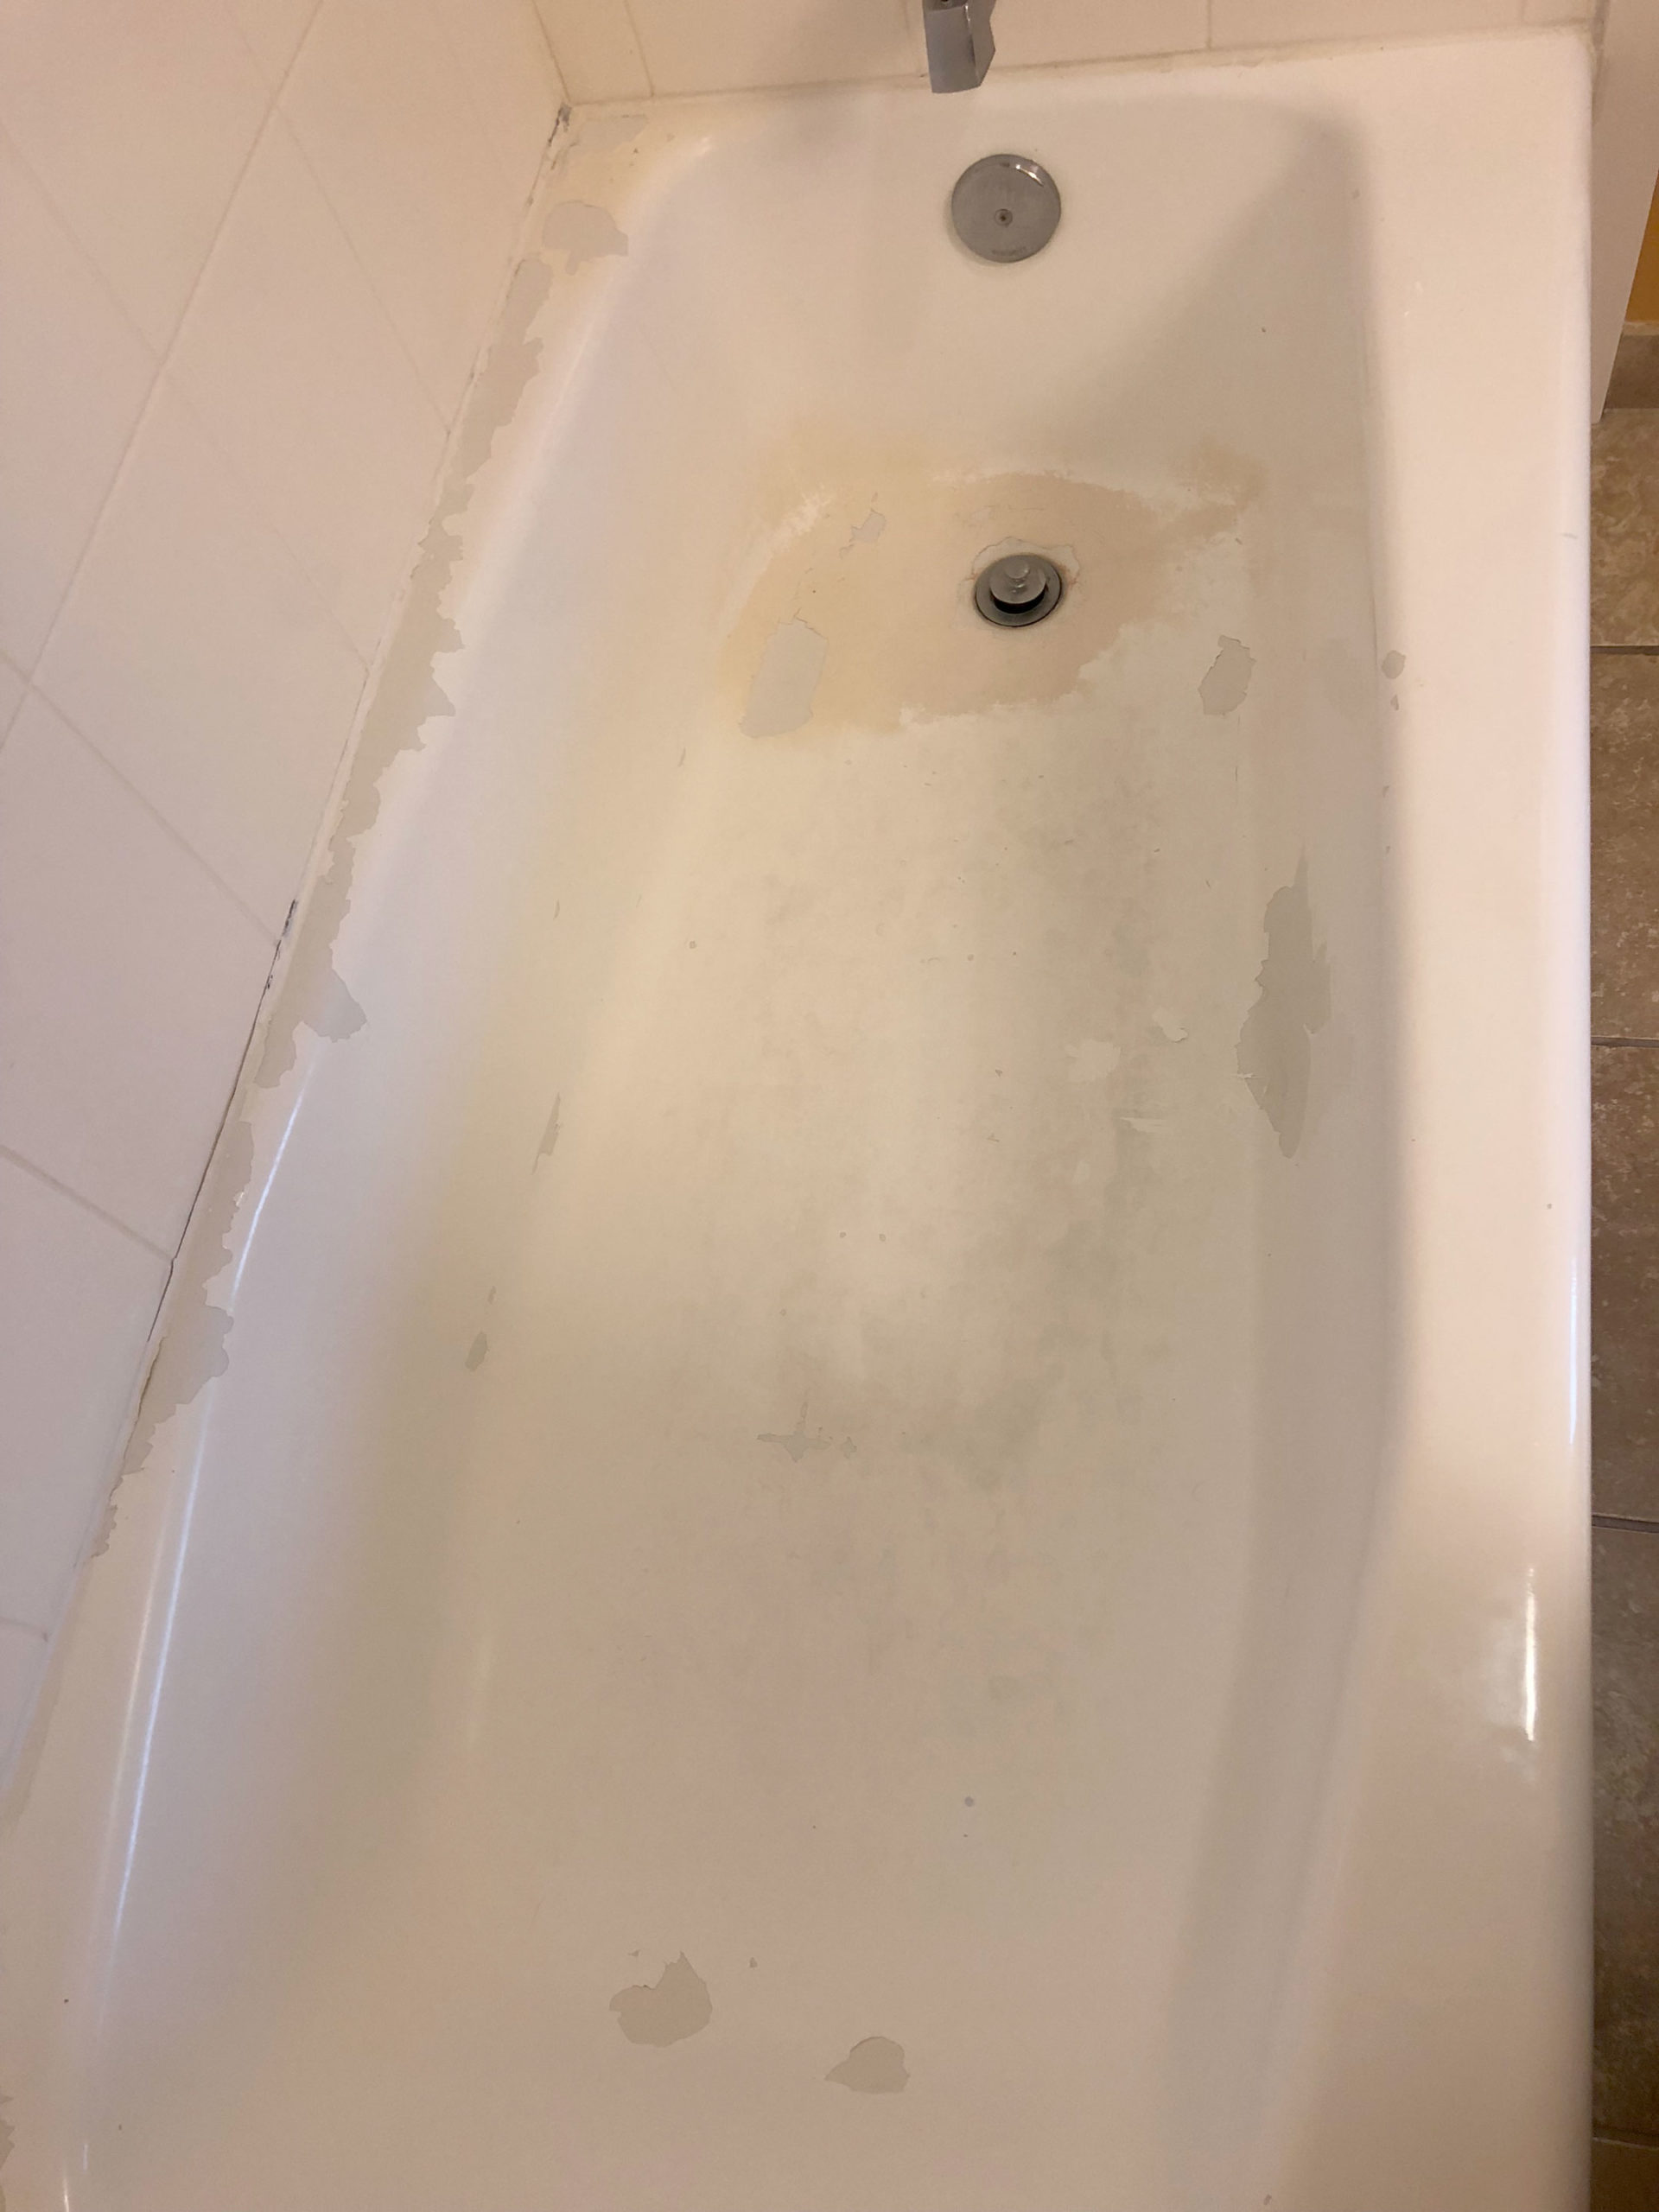 Chipped and peeling tub before